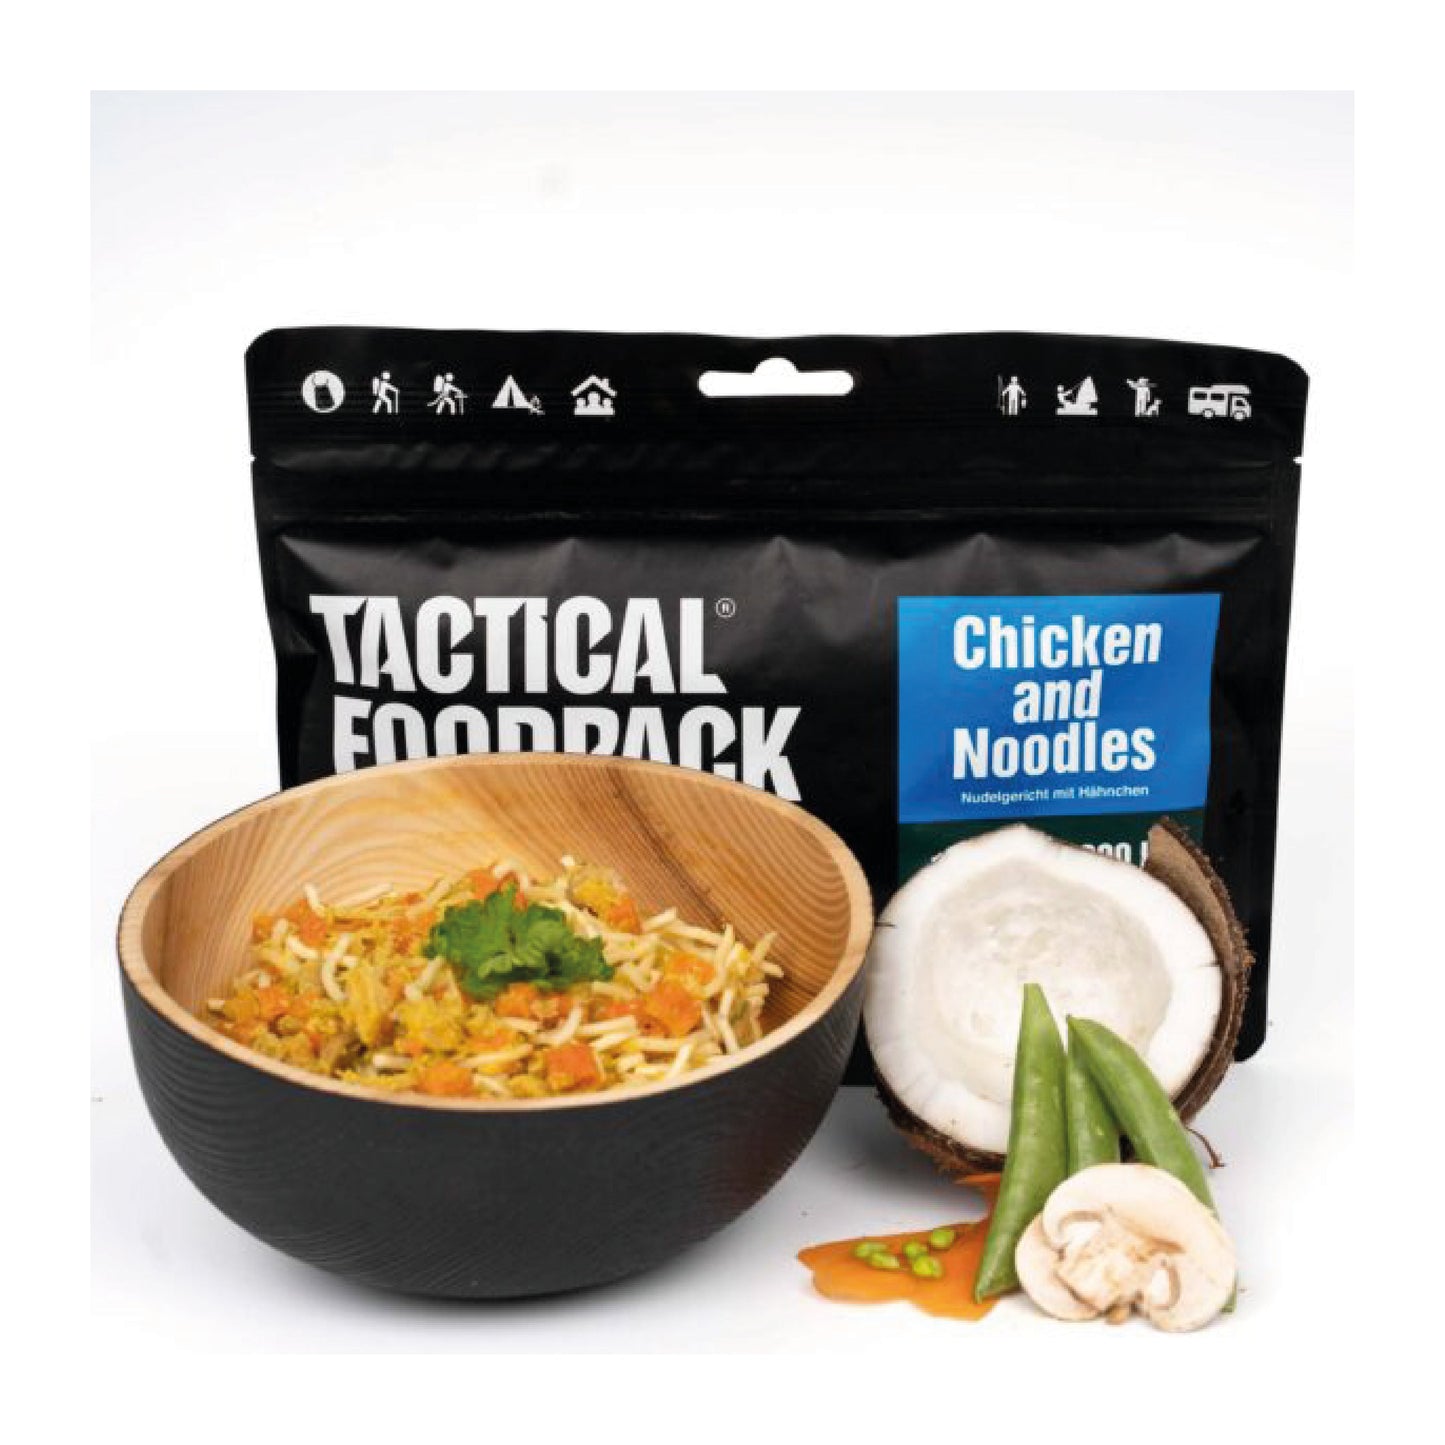 TACTICAL FOODPACK® Nudelgericht mit Hühnchen 115g